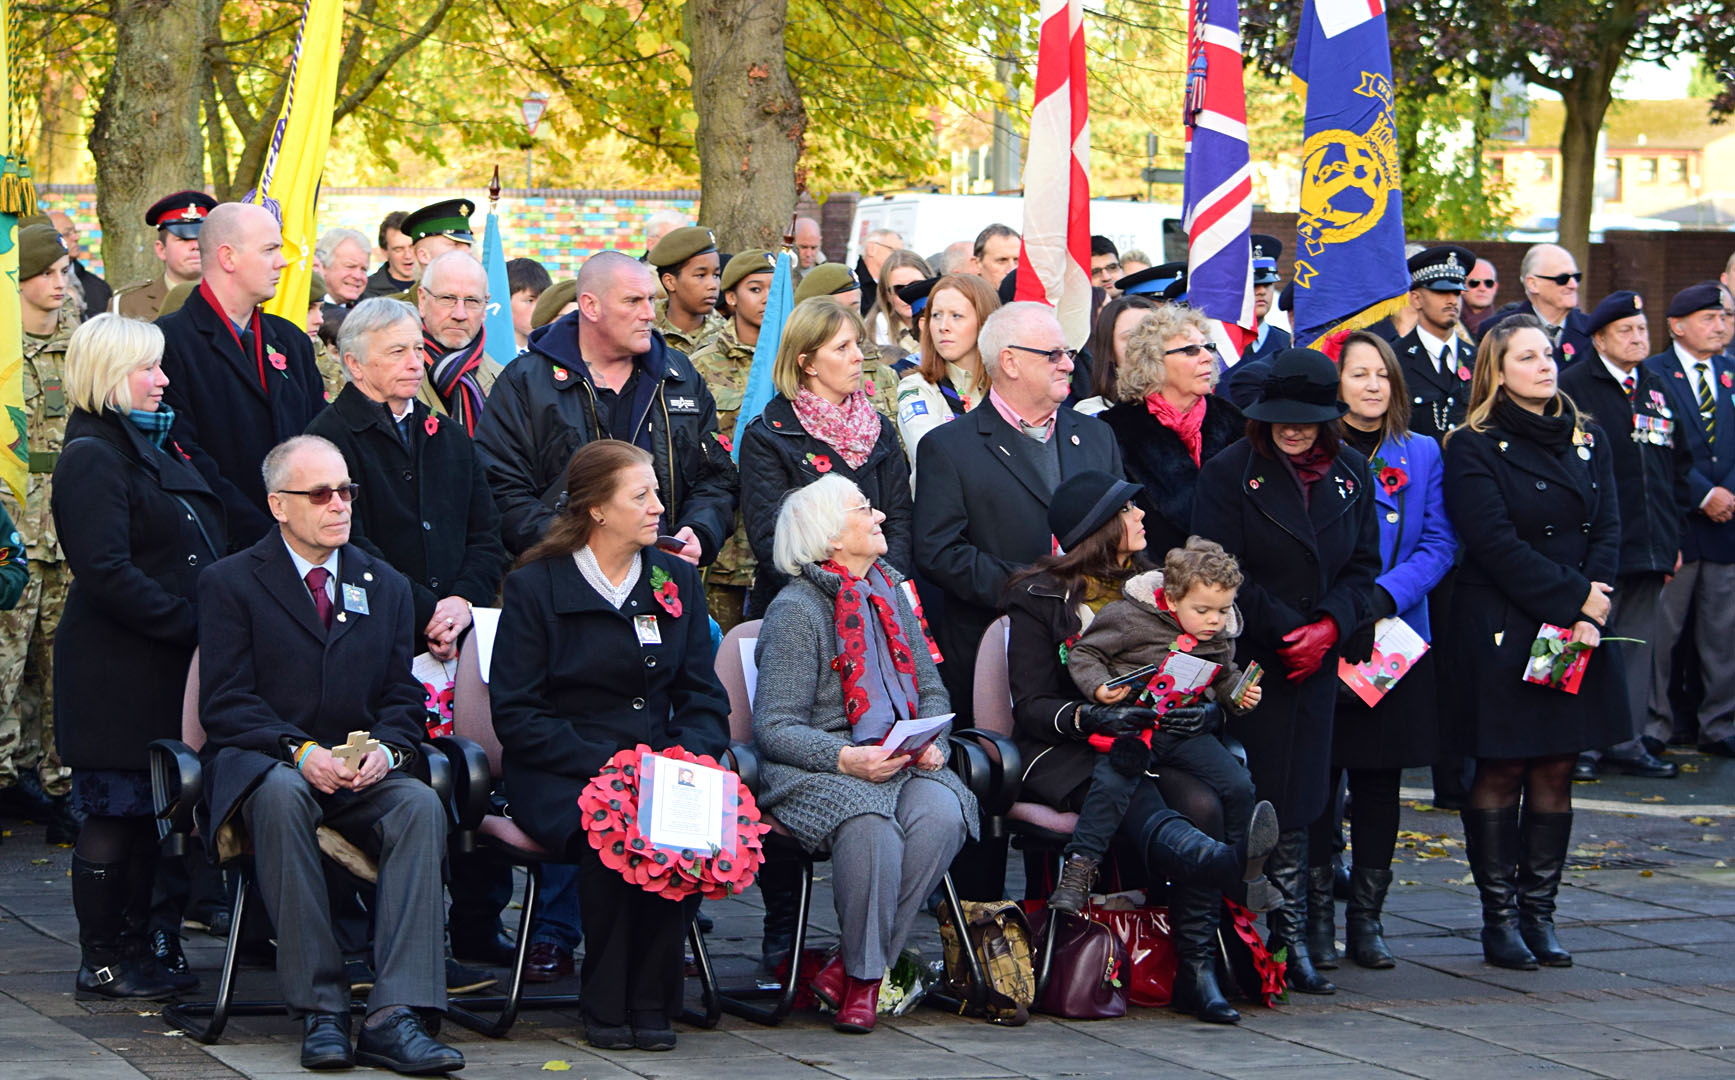 Mayor and Chairman to lead Remembrance Sunday service